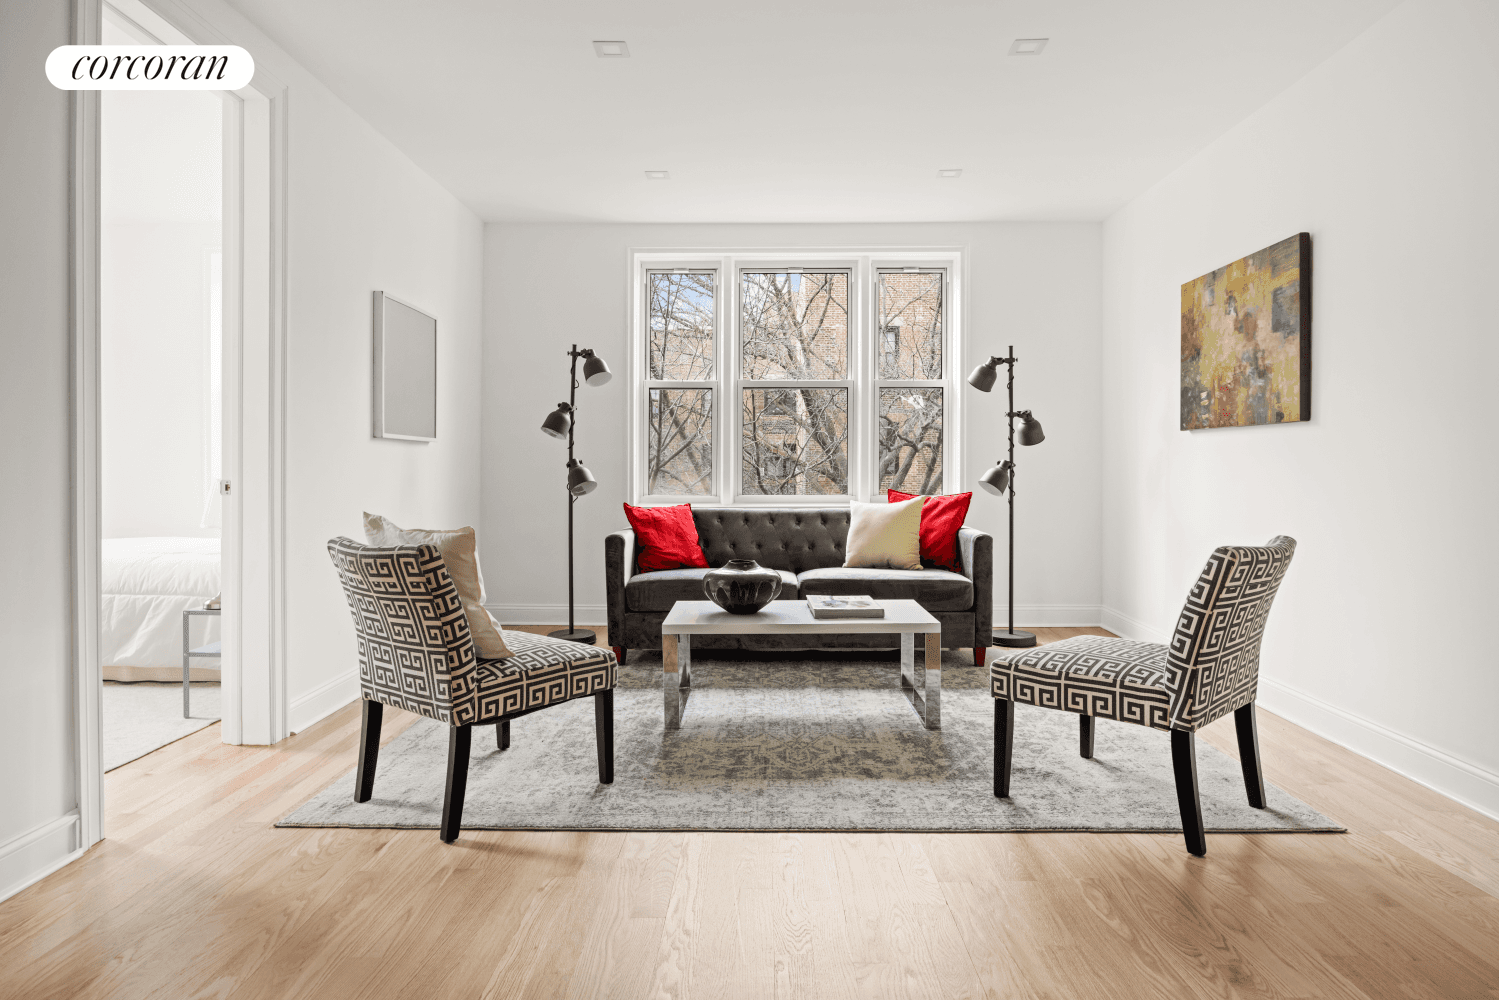 225 Park Place, unit 5C, is an exquisitely renovated, perfectly located TWO BEDROOM, TWO BATH coop, sited on the cusp of two of Brooklyn's favorite neighborhoods PROSPECT HEIGHTS and Park ...